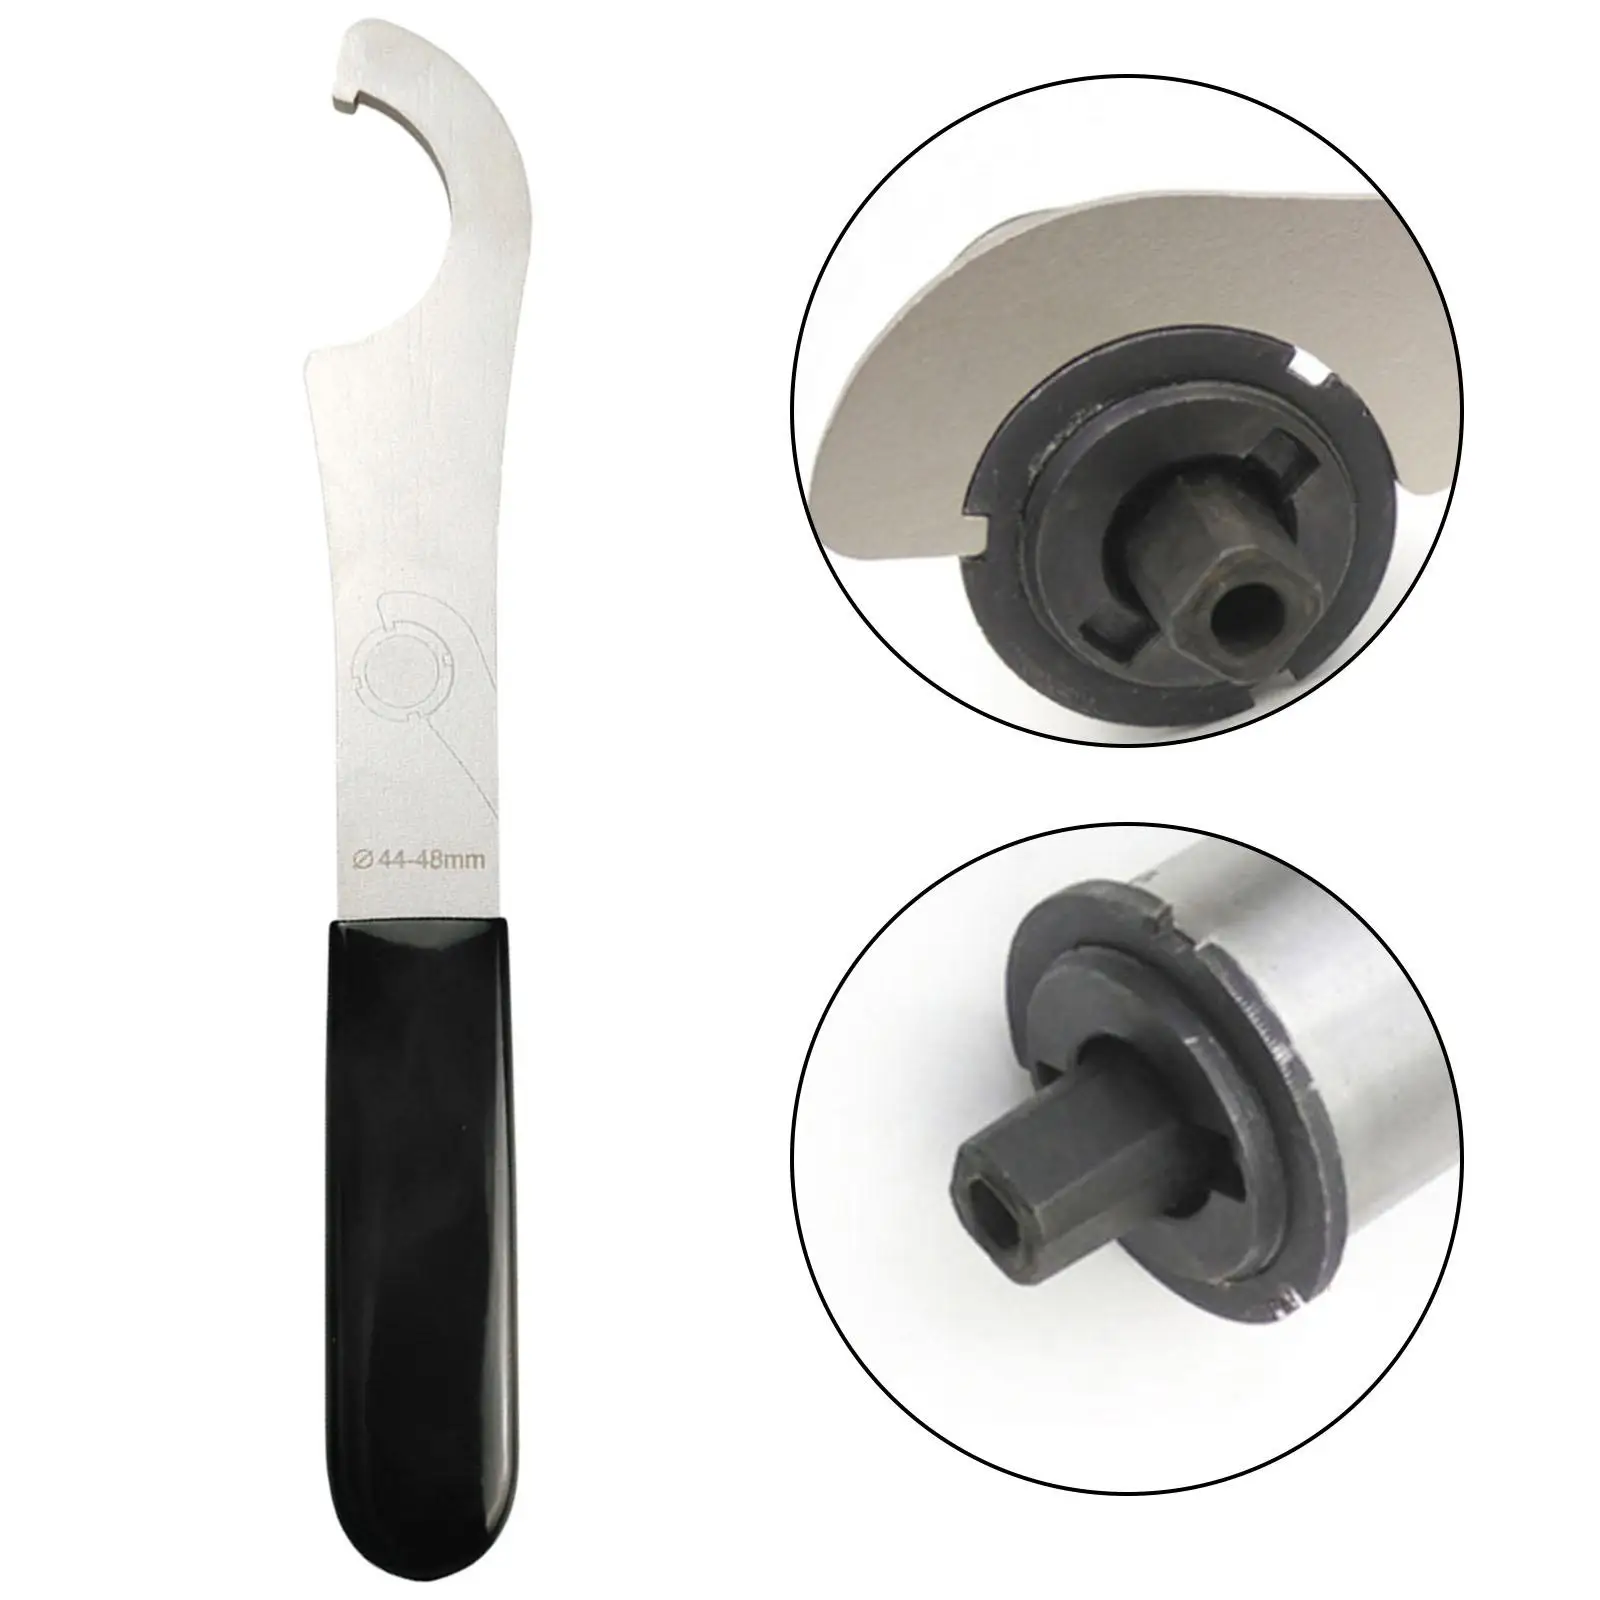  Bike Bottom Bracket Remover Hook Wrench Tool Accessories Part